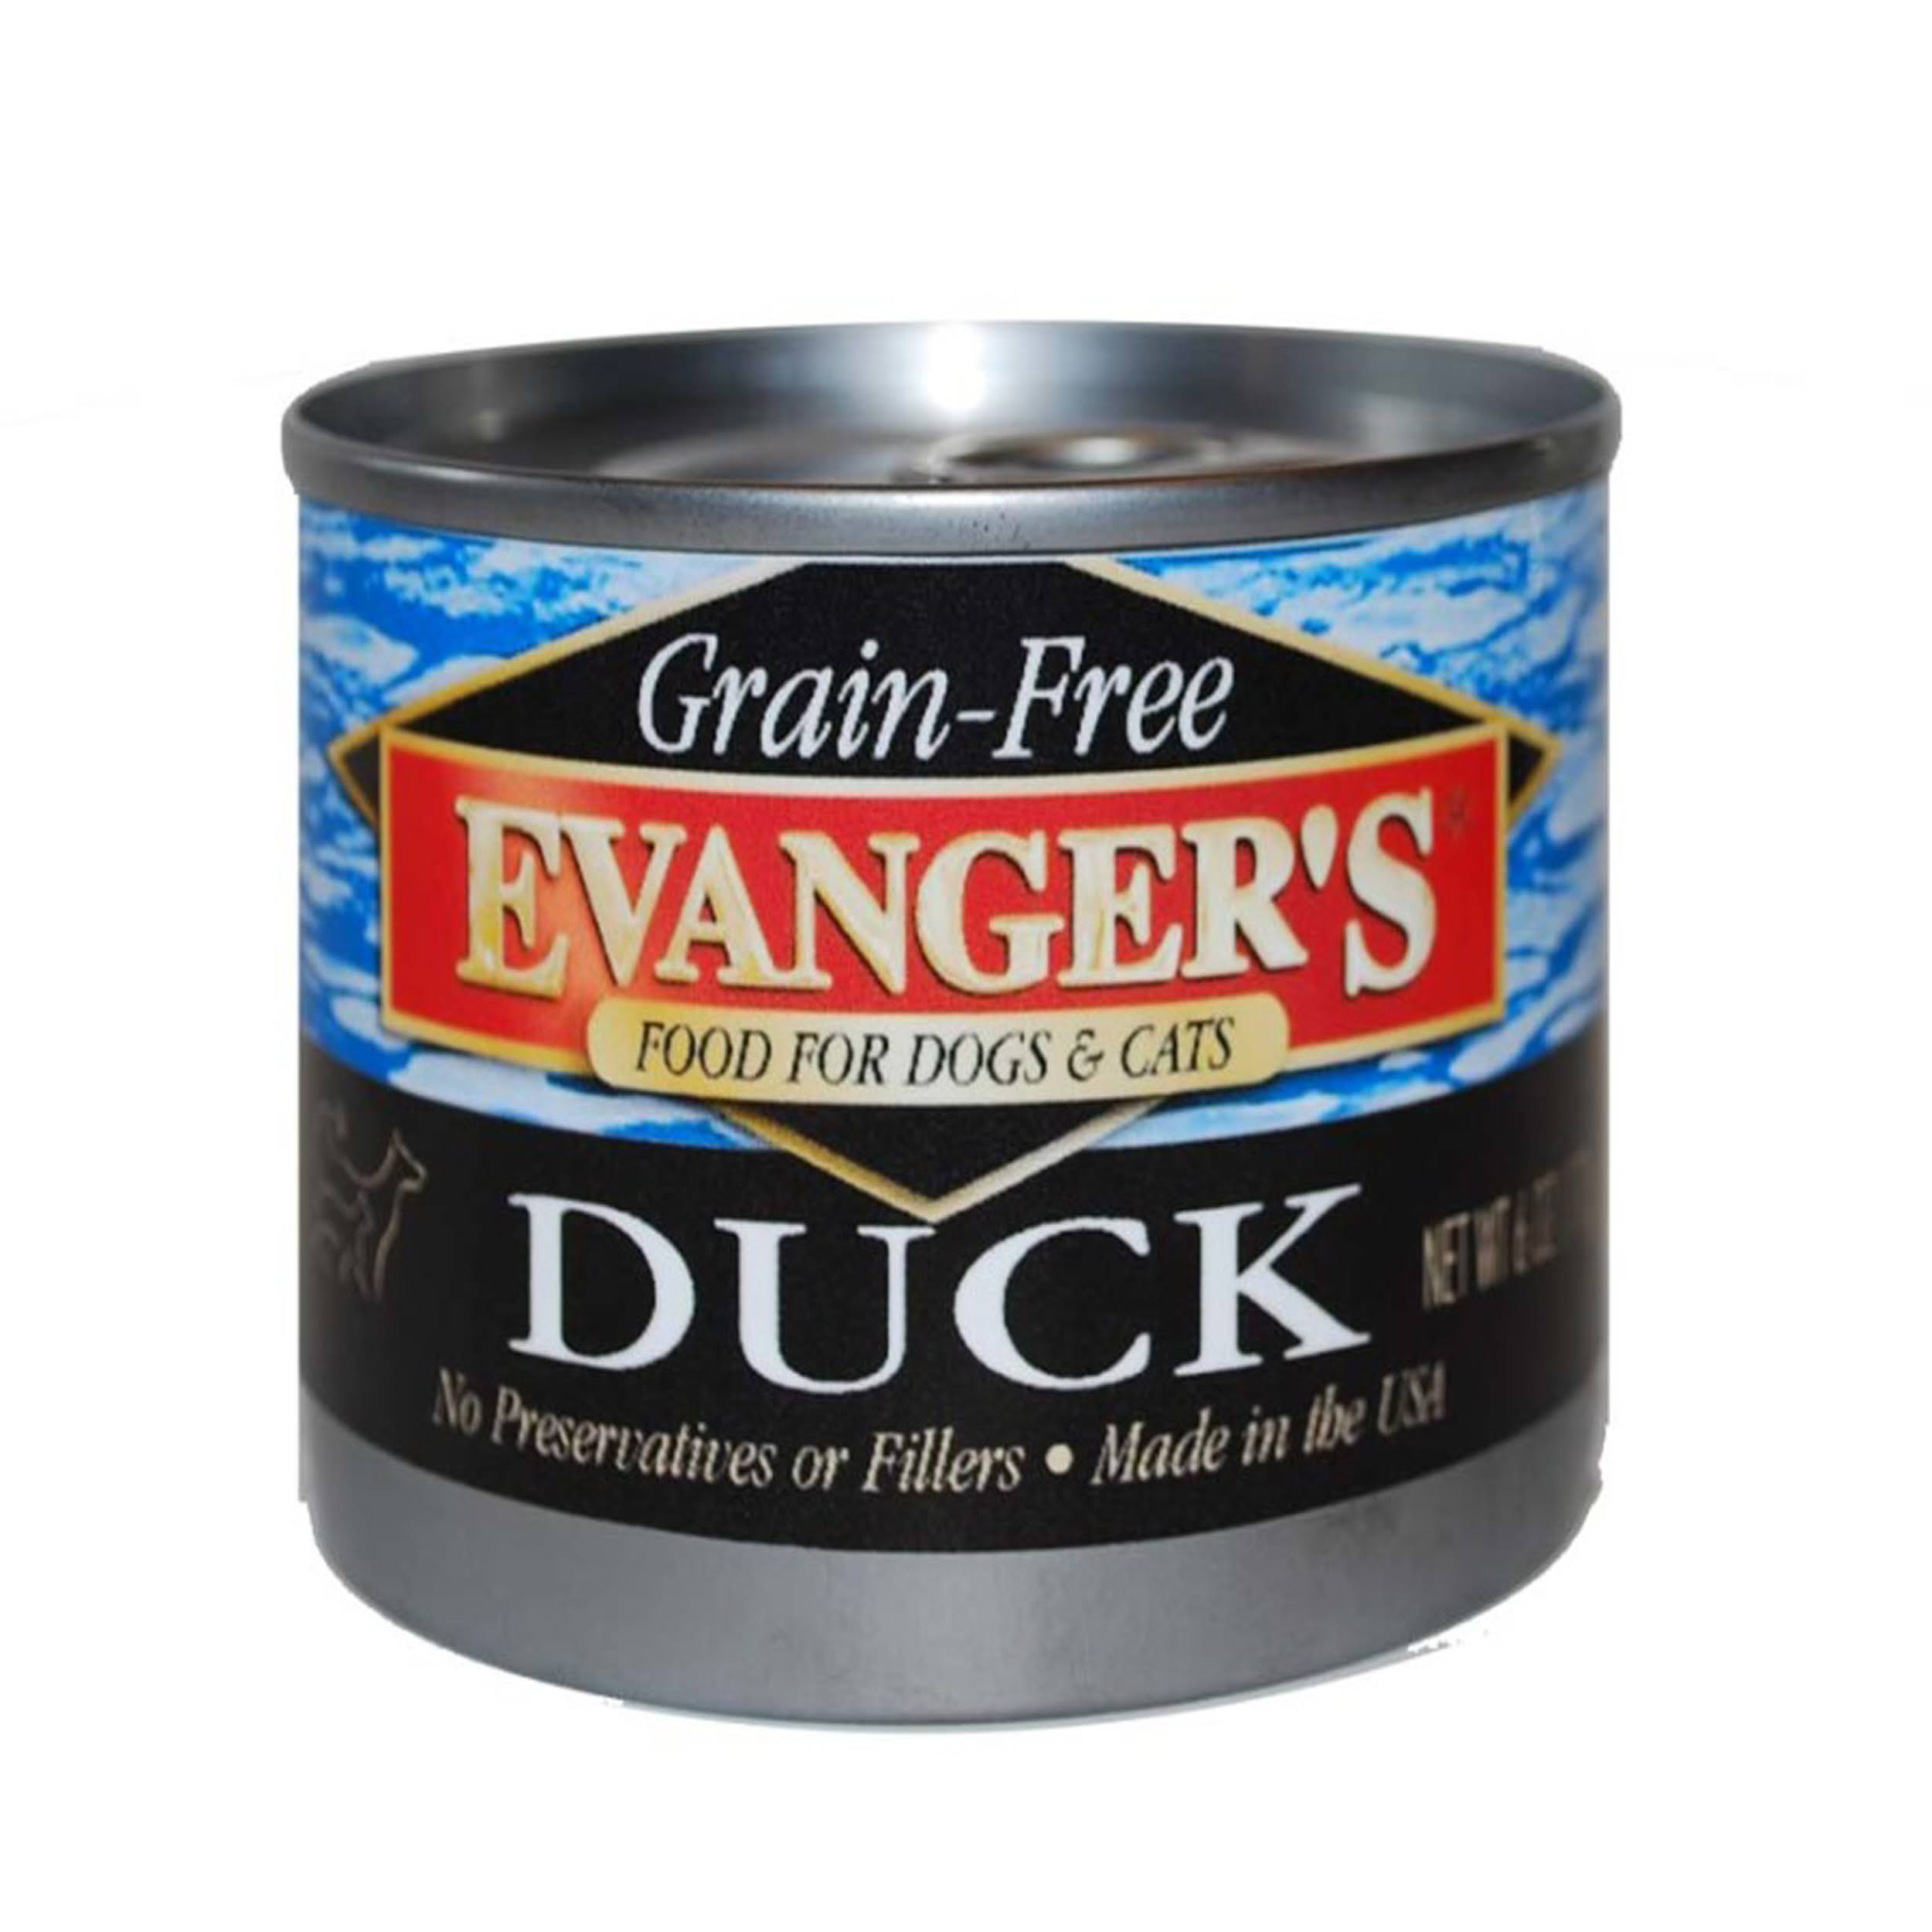 Evangers Grain Free Duck for Cats and Dogs